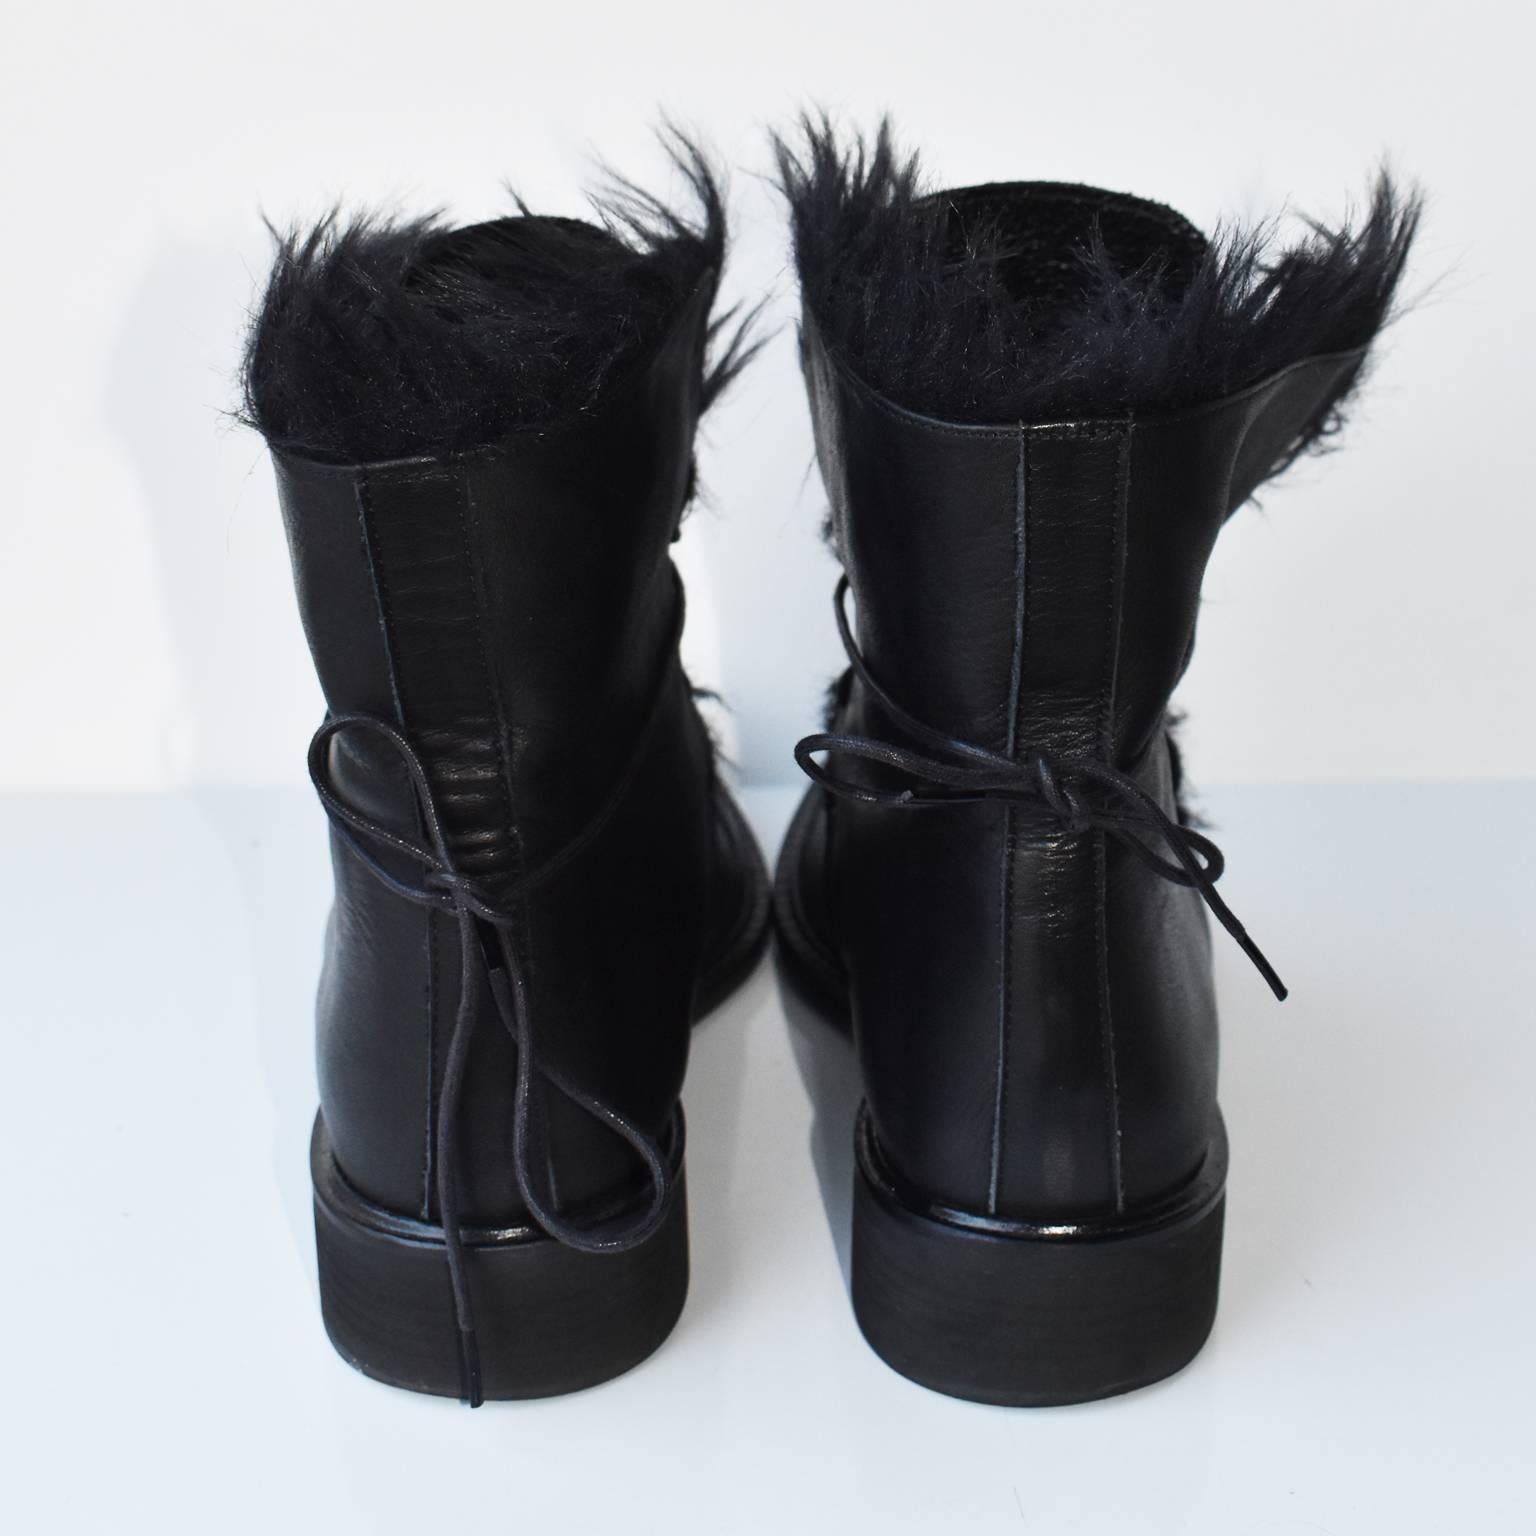 Y's Fur Lined Leather Boots In Excellent Condition For Sale In London, GB